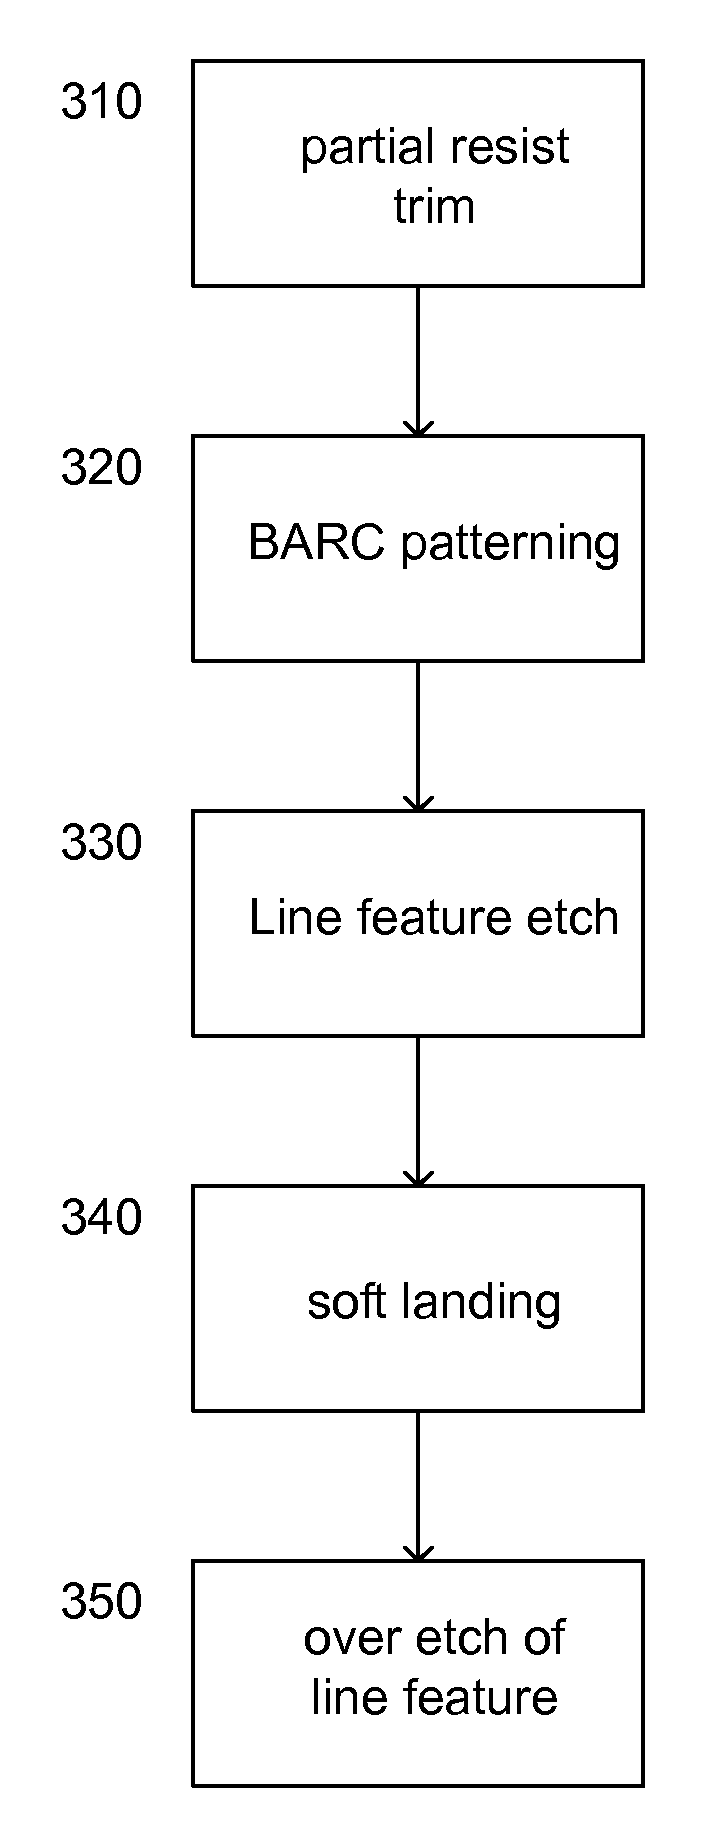 Processing with Reduced Line End Shortening Ratio